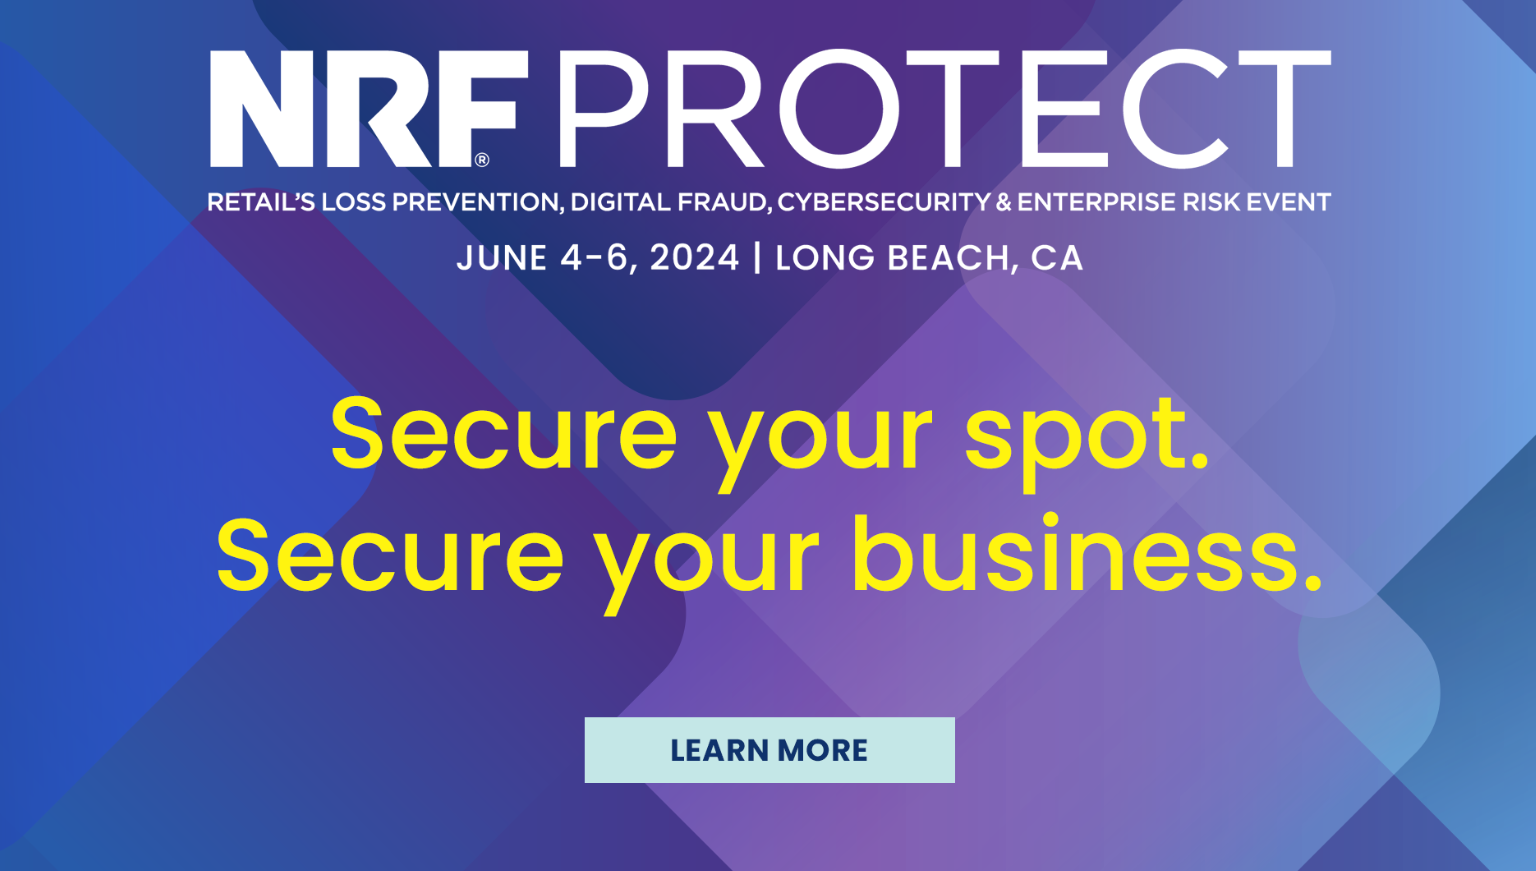 NRF PROTECT – More than just a trade show!